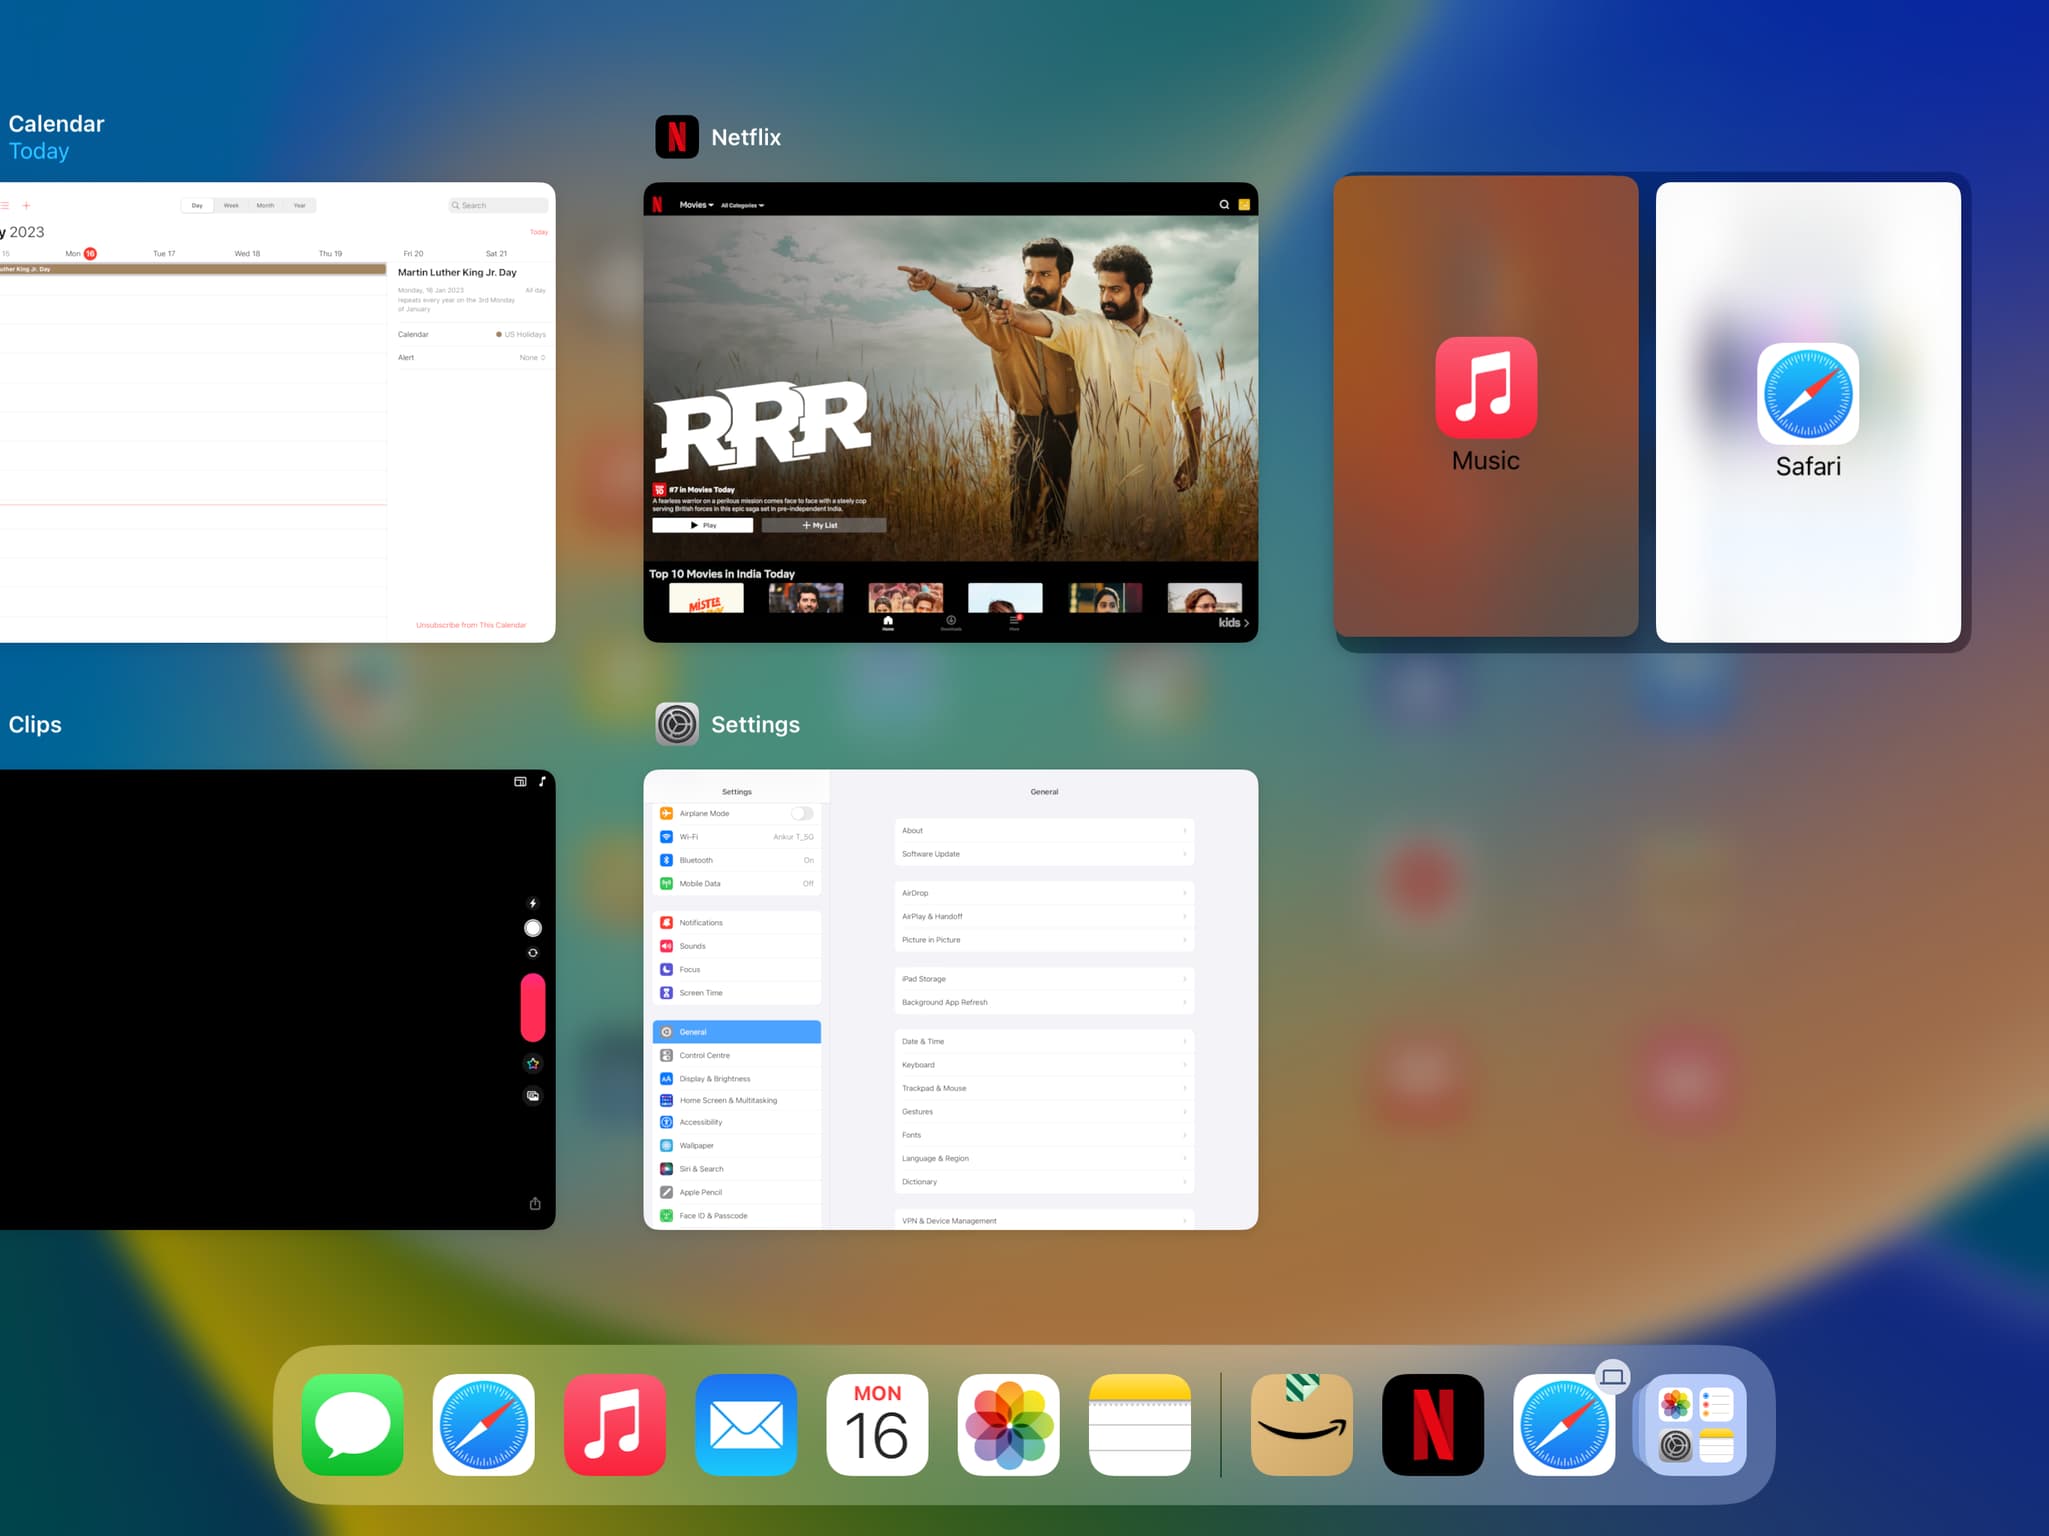 Enter Split View using App Switcher by dragging one app tile over another